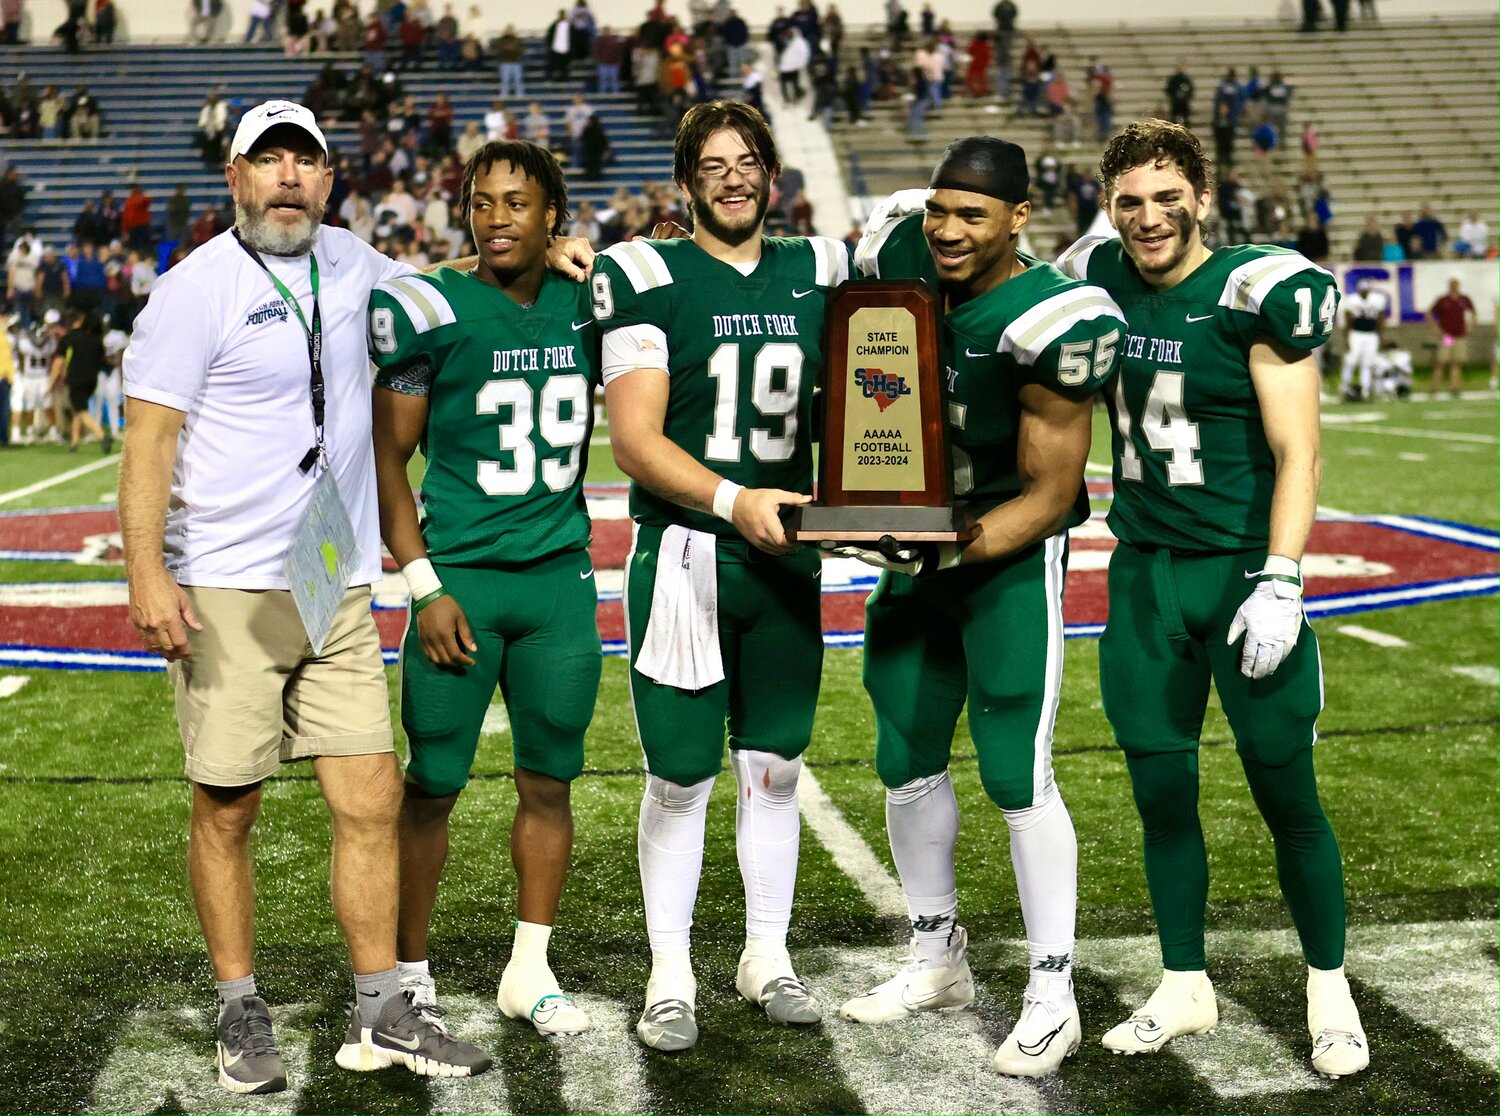 The Dutch Fork football team won its seventh 5A championship in eight years after overcoming a season full of adversity.